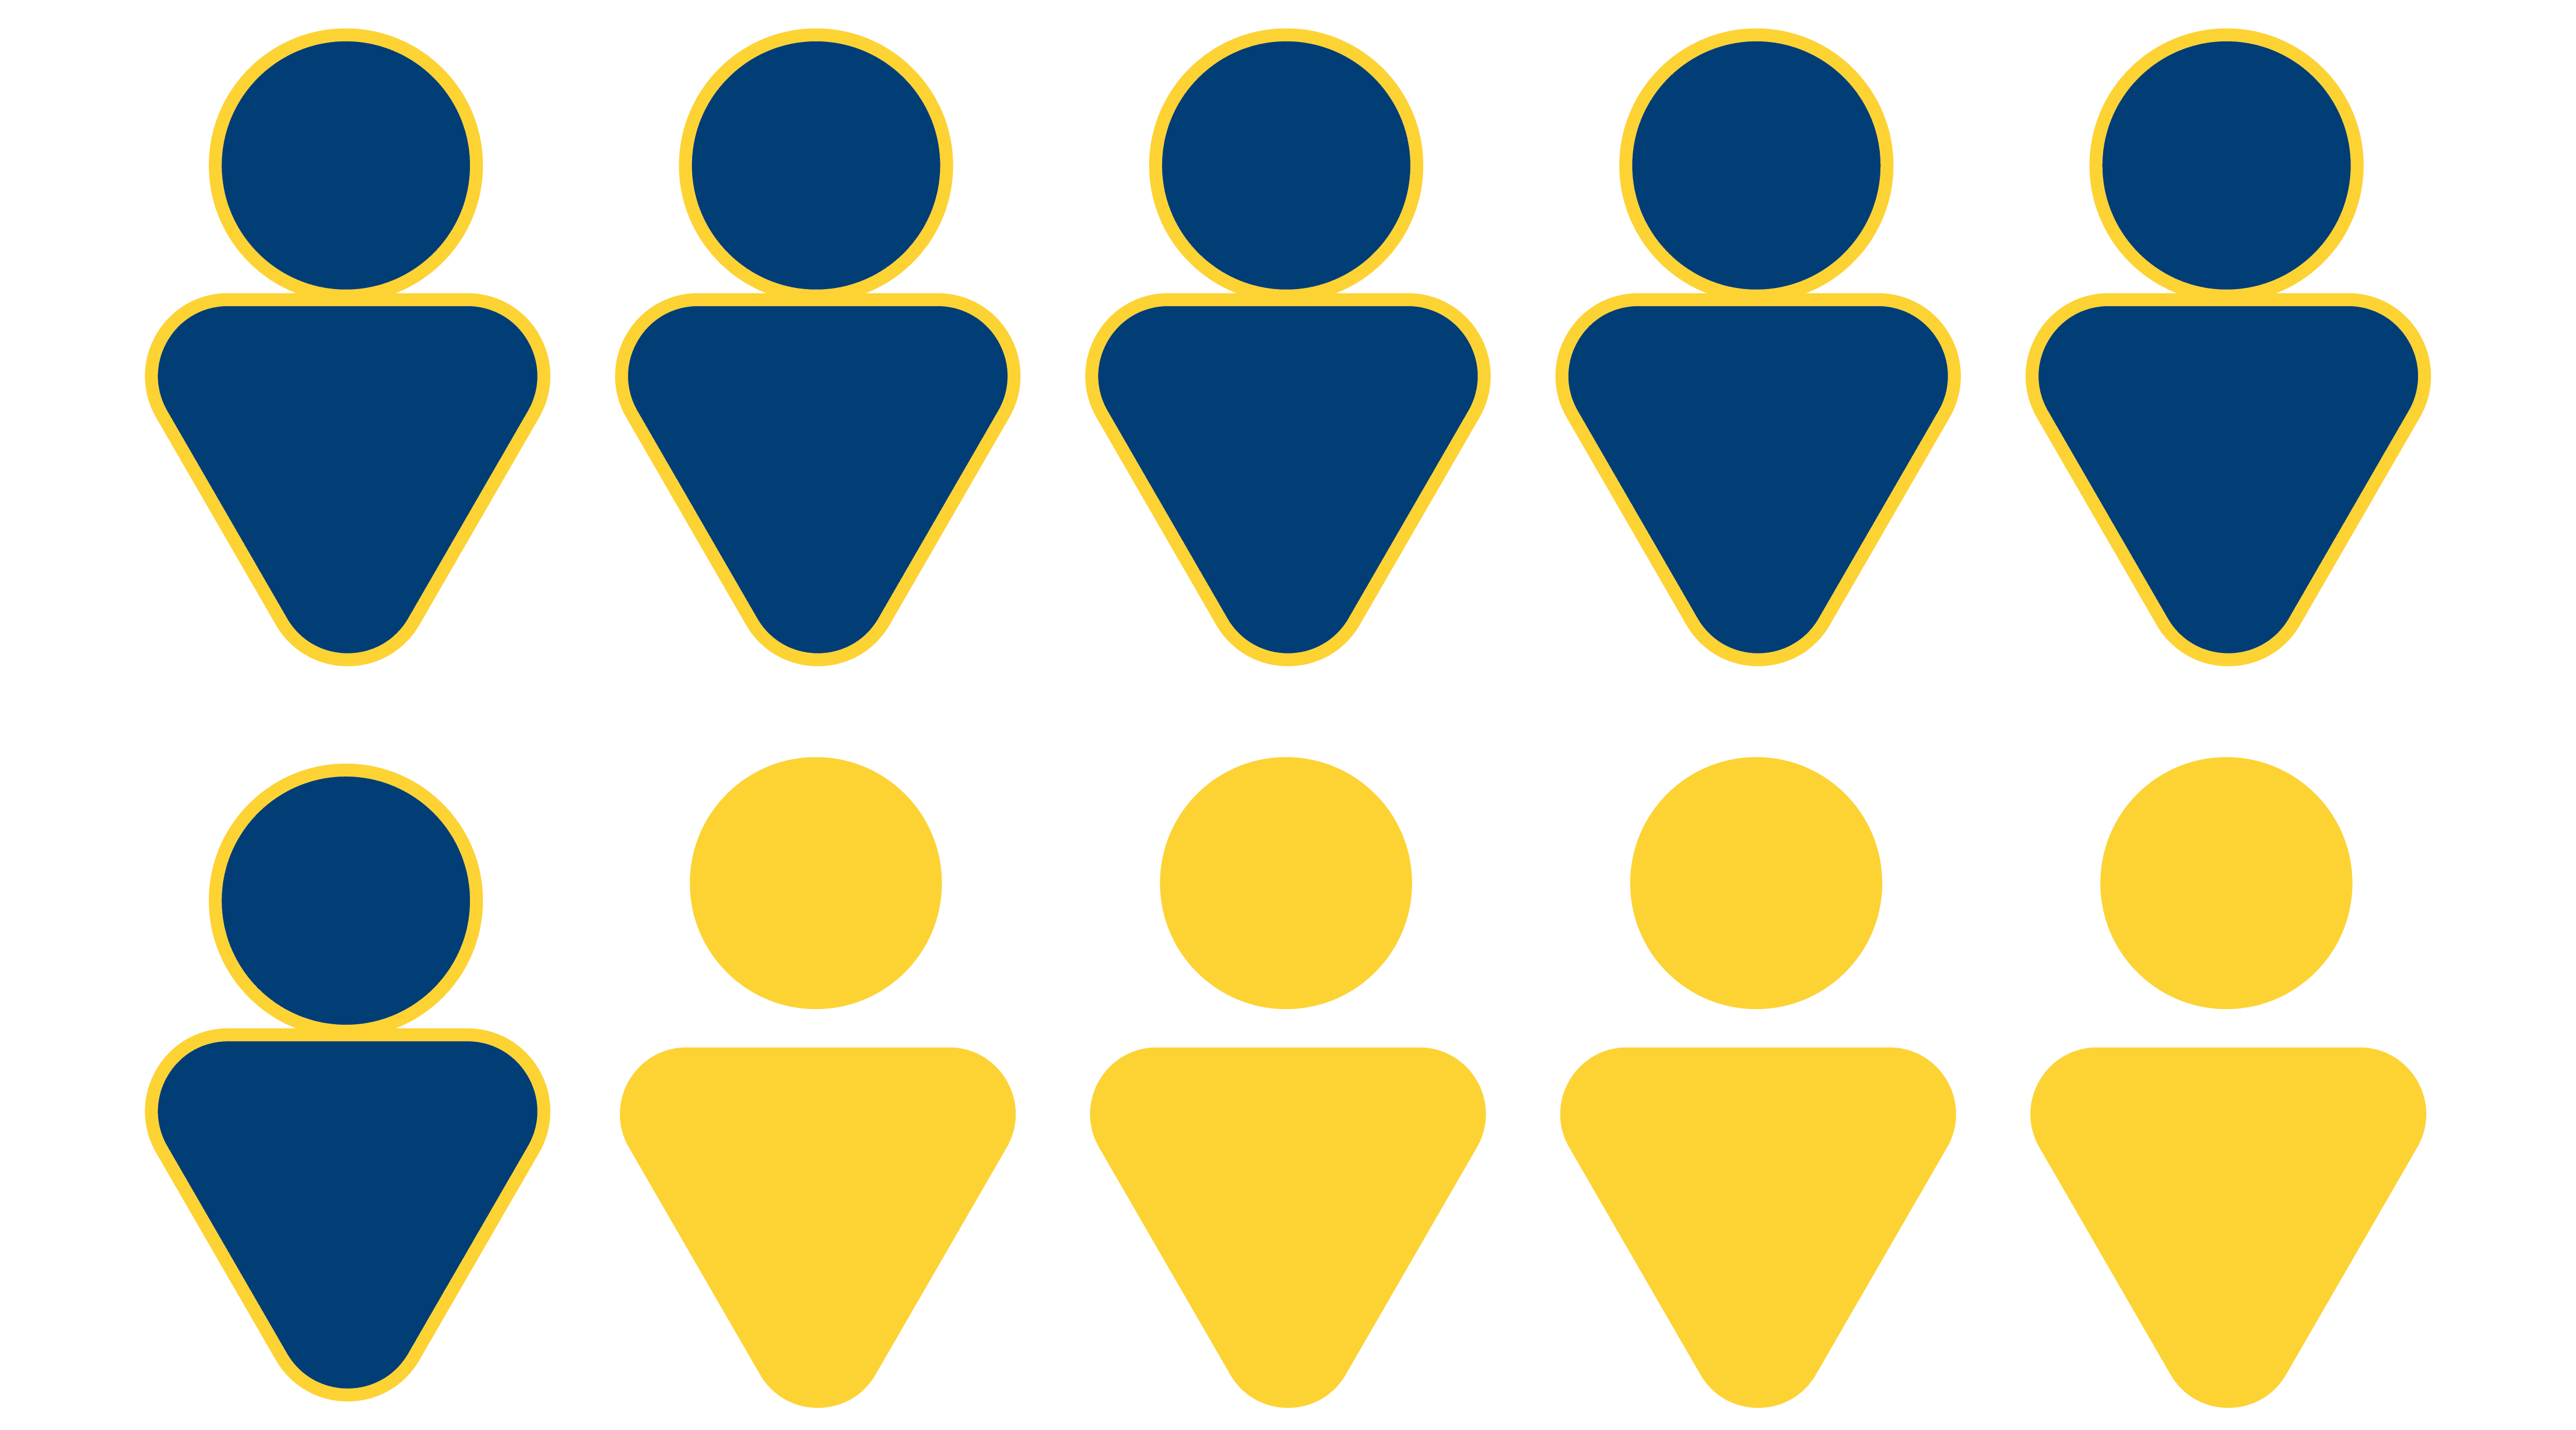 Image shows ten people icons, 6 of of them are in blue and 4 of them are in yellow. This represents how 60 percent of the Noble Classes of 2015 and 2016 undocumented graduates who enrolled in college went on to get their bachelor's degree in five years or less